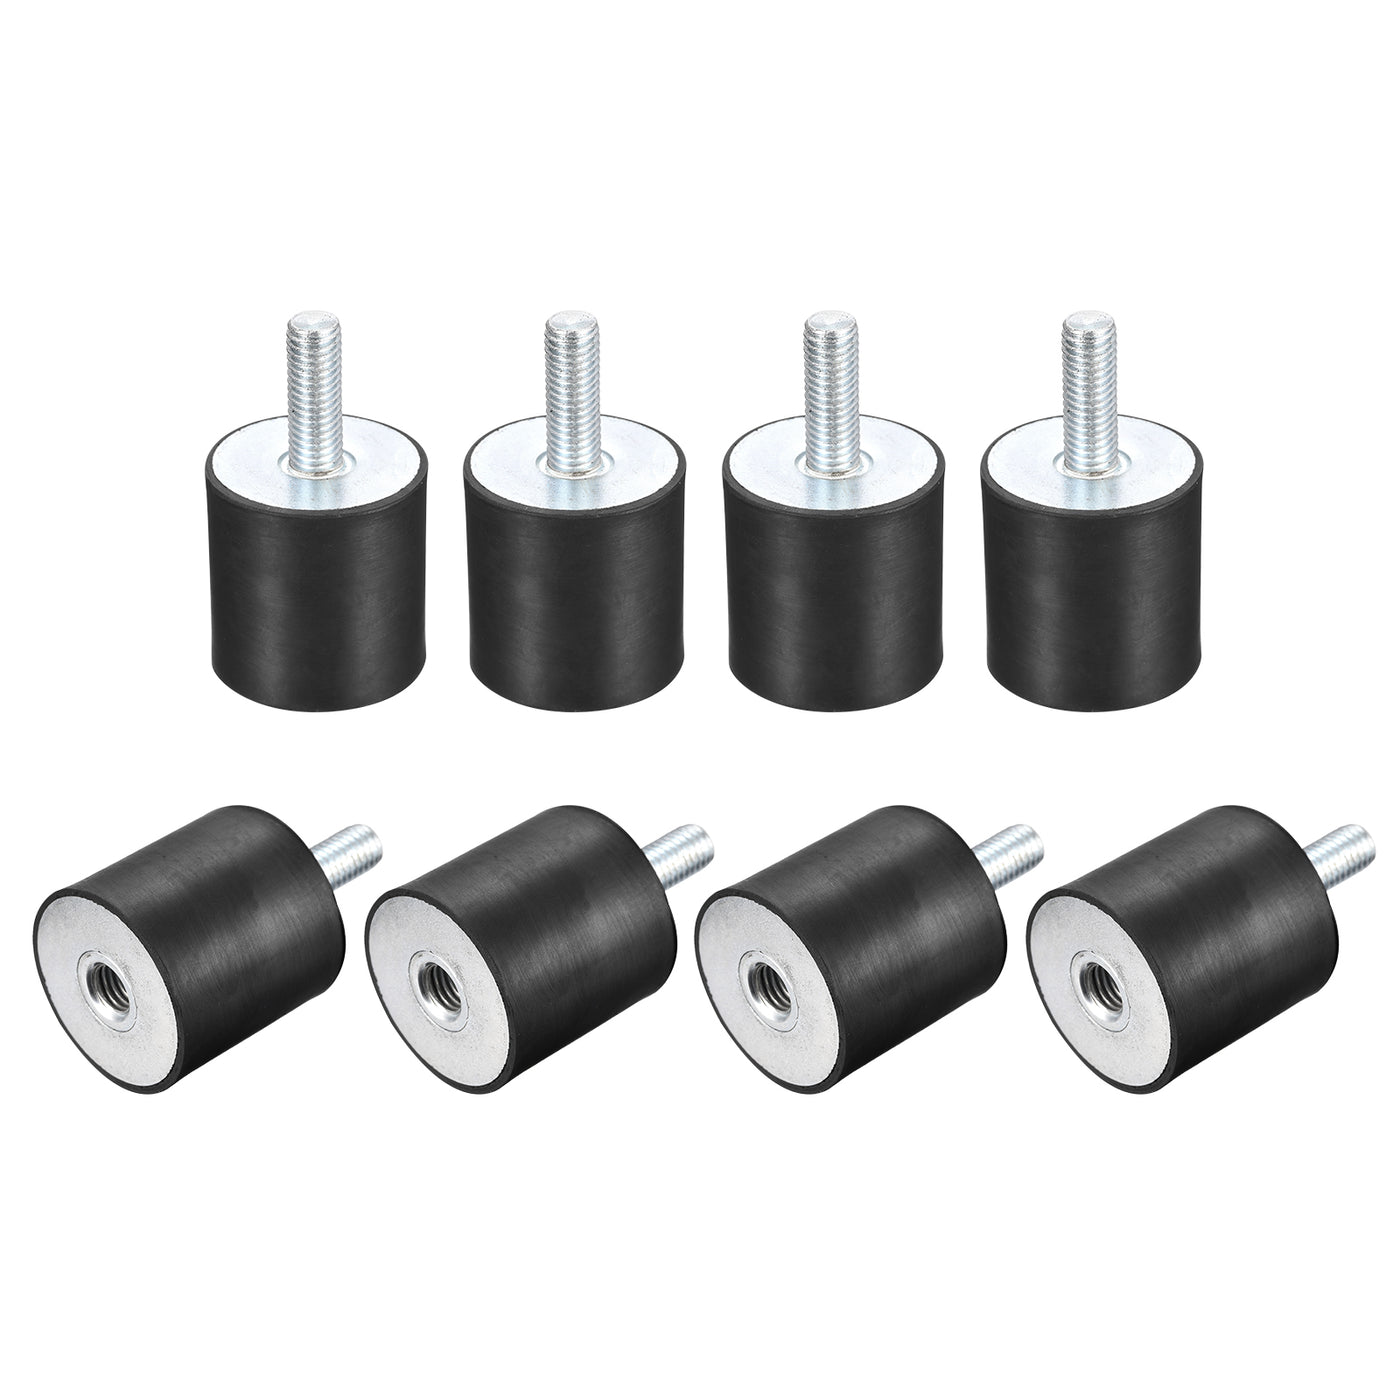 uxcell Uxcell Rubber Mounts 8pcs M10 Male/Female Vibration Isolator Shock Absorber D40mmxH40mm